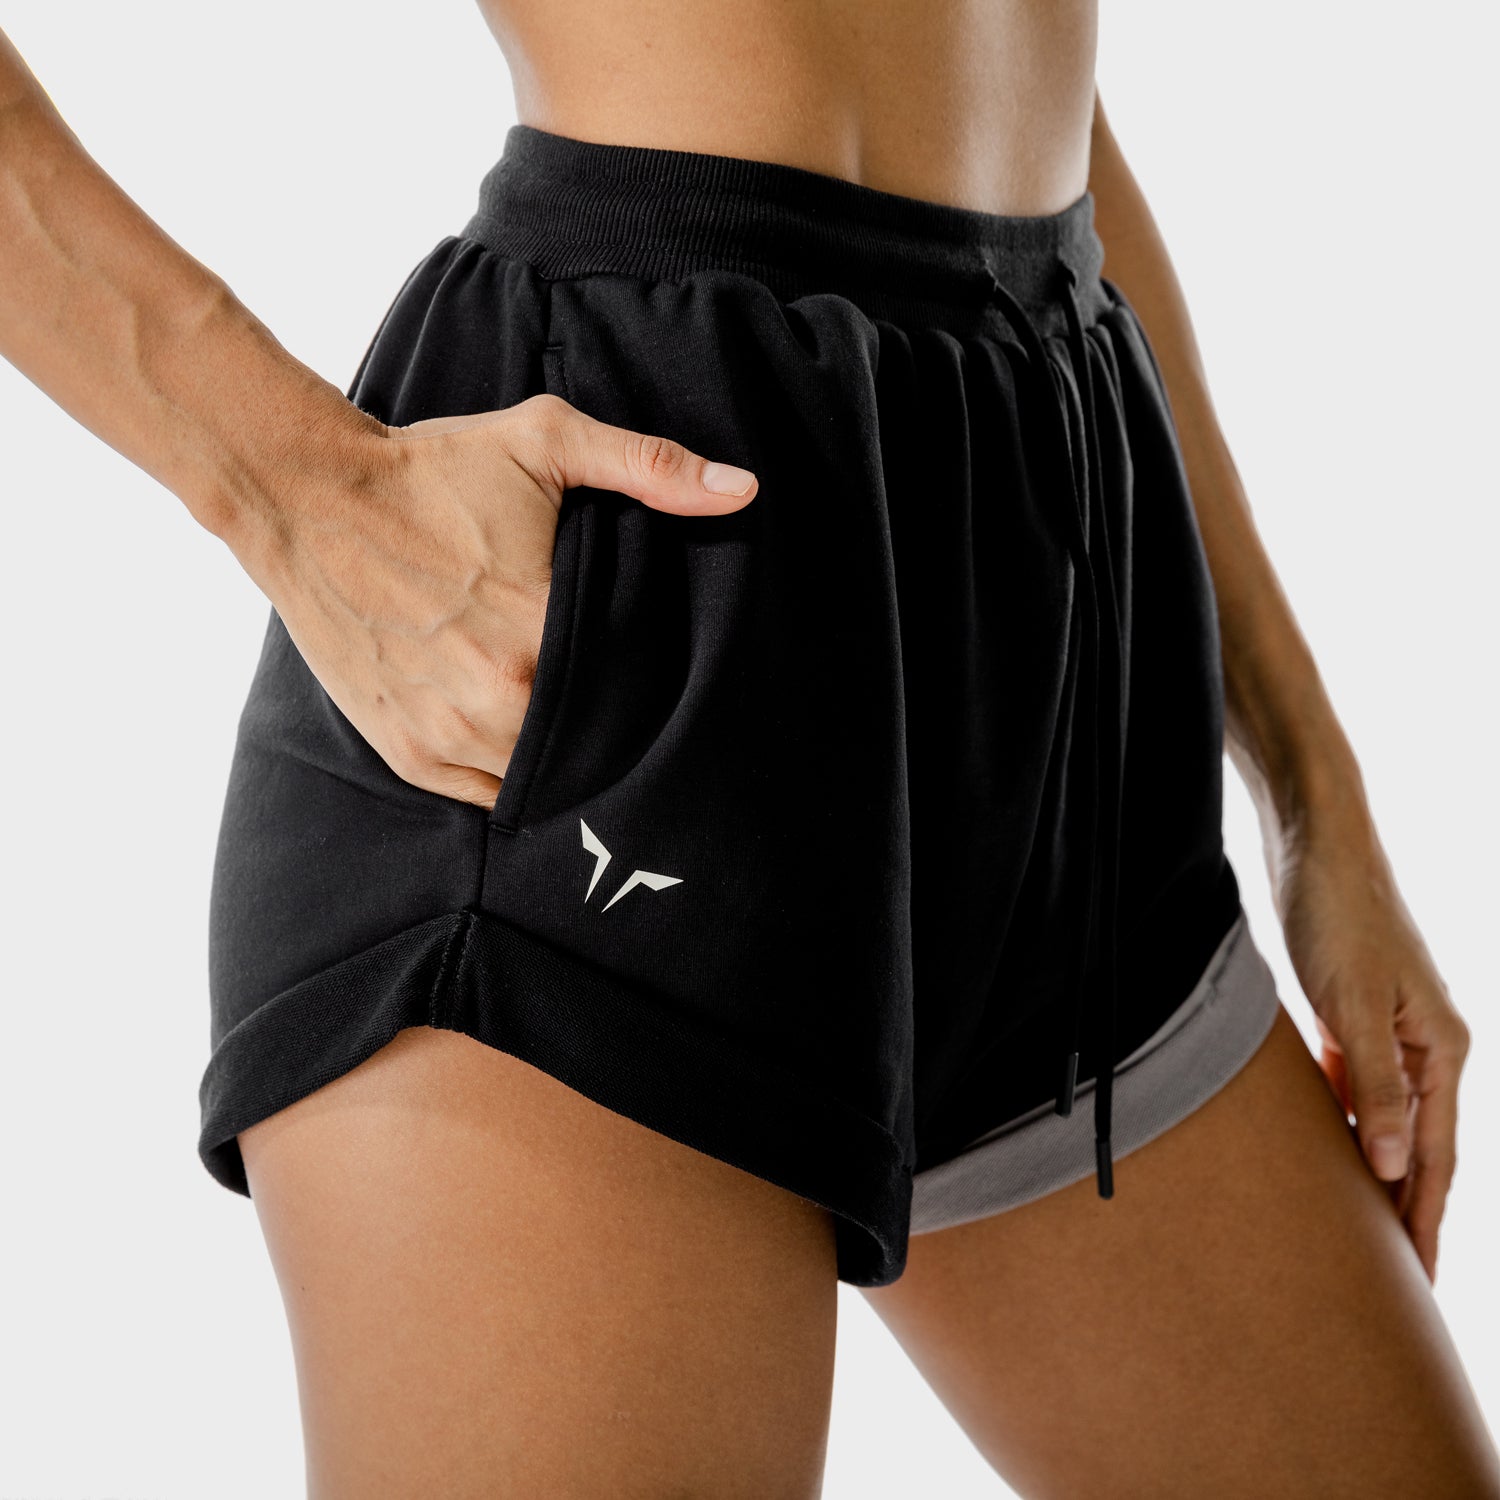 squatwolf-workout-clothes-lab-shorts-black-gym-shorts-for-women